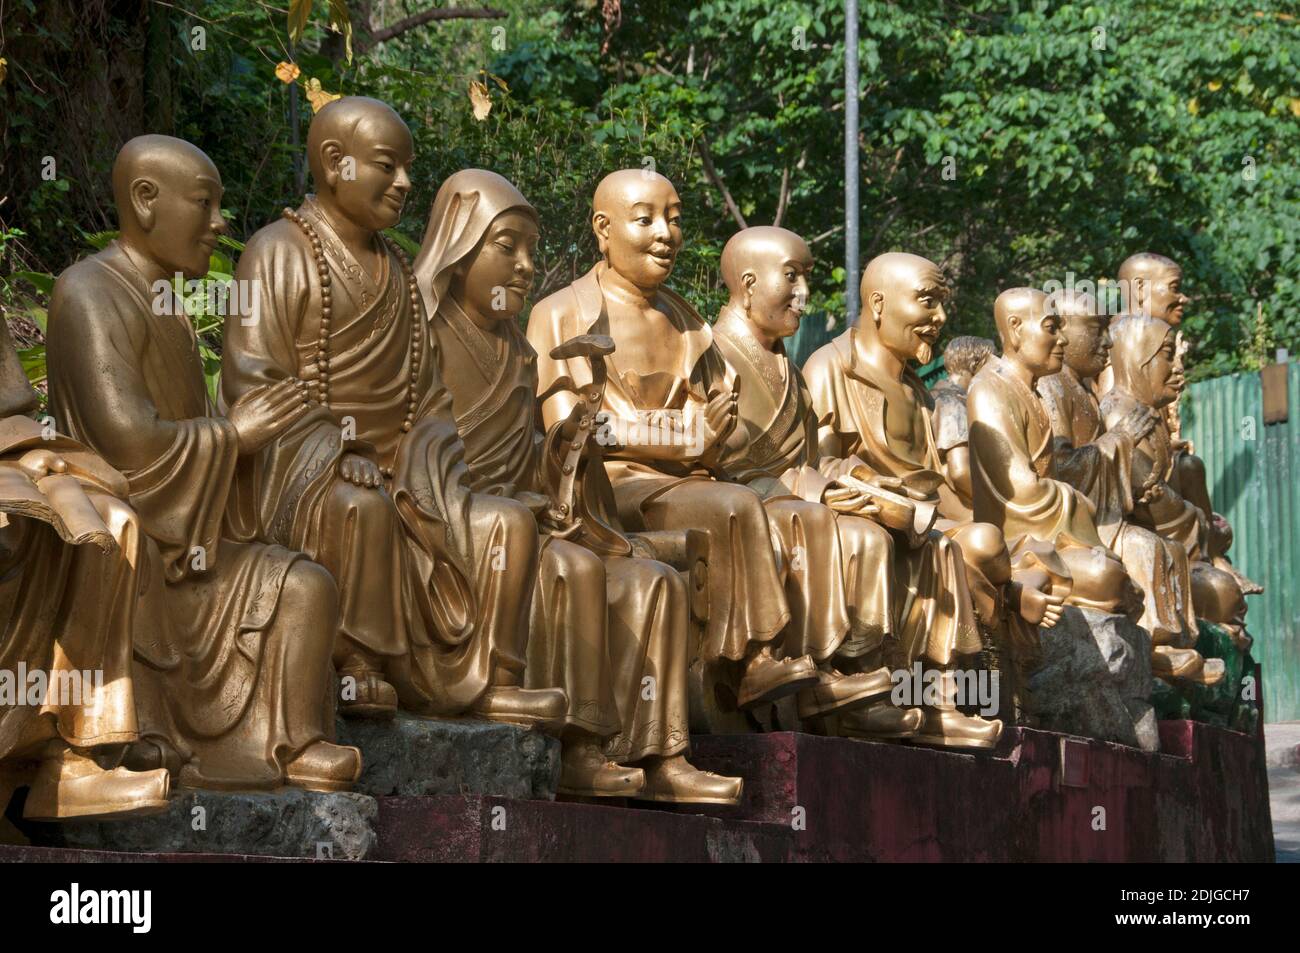 The Ten Thousand Buddha Monastery in Sha Tin, New Territories, Hong Kong. Each Buddha statue is unique. More than 12,000 Buddha statues are on display at this shrine within walking distance to a train station. Ernie Mastroianni photo. Stock Photo